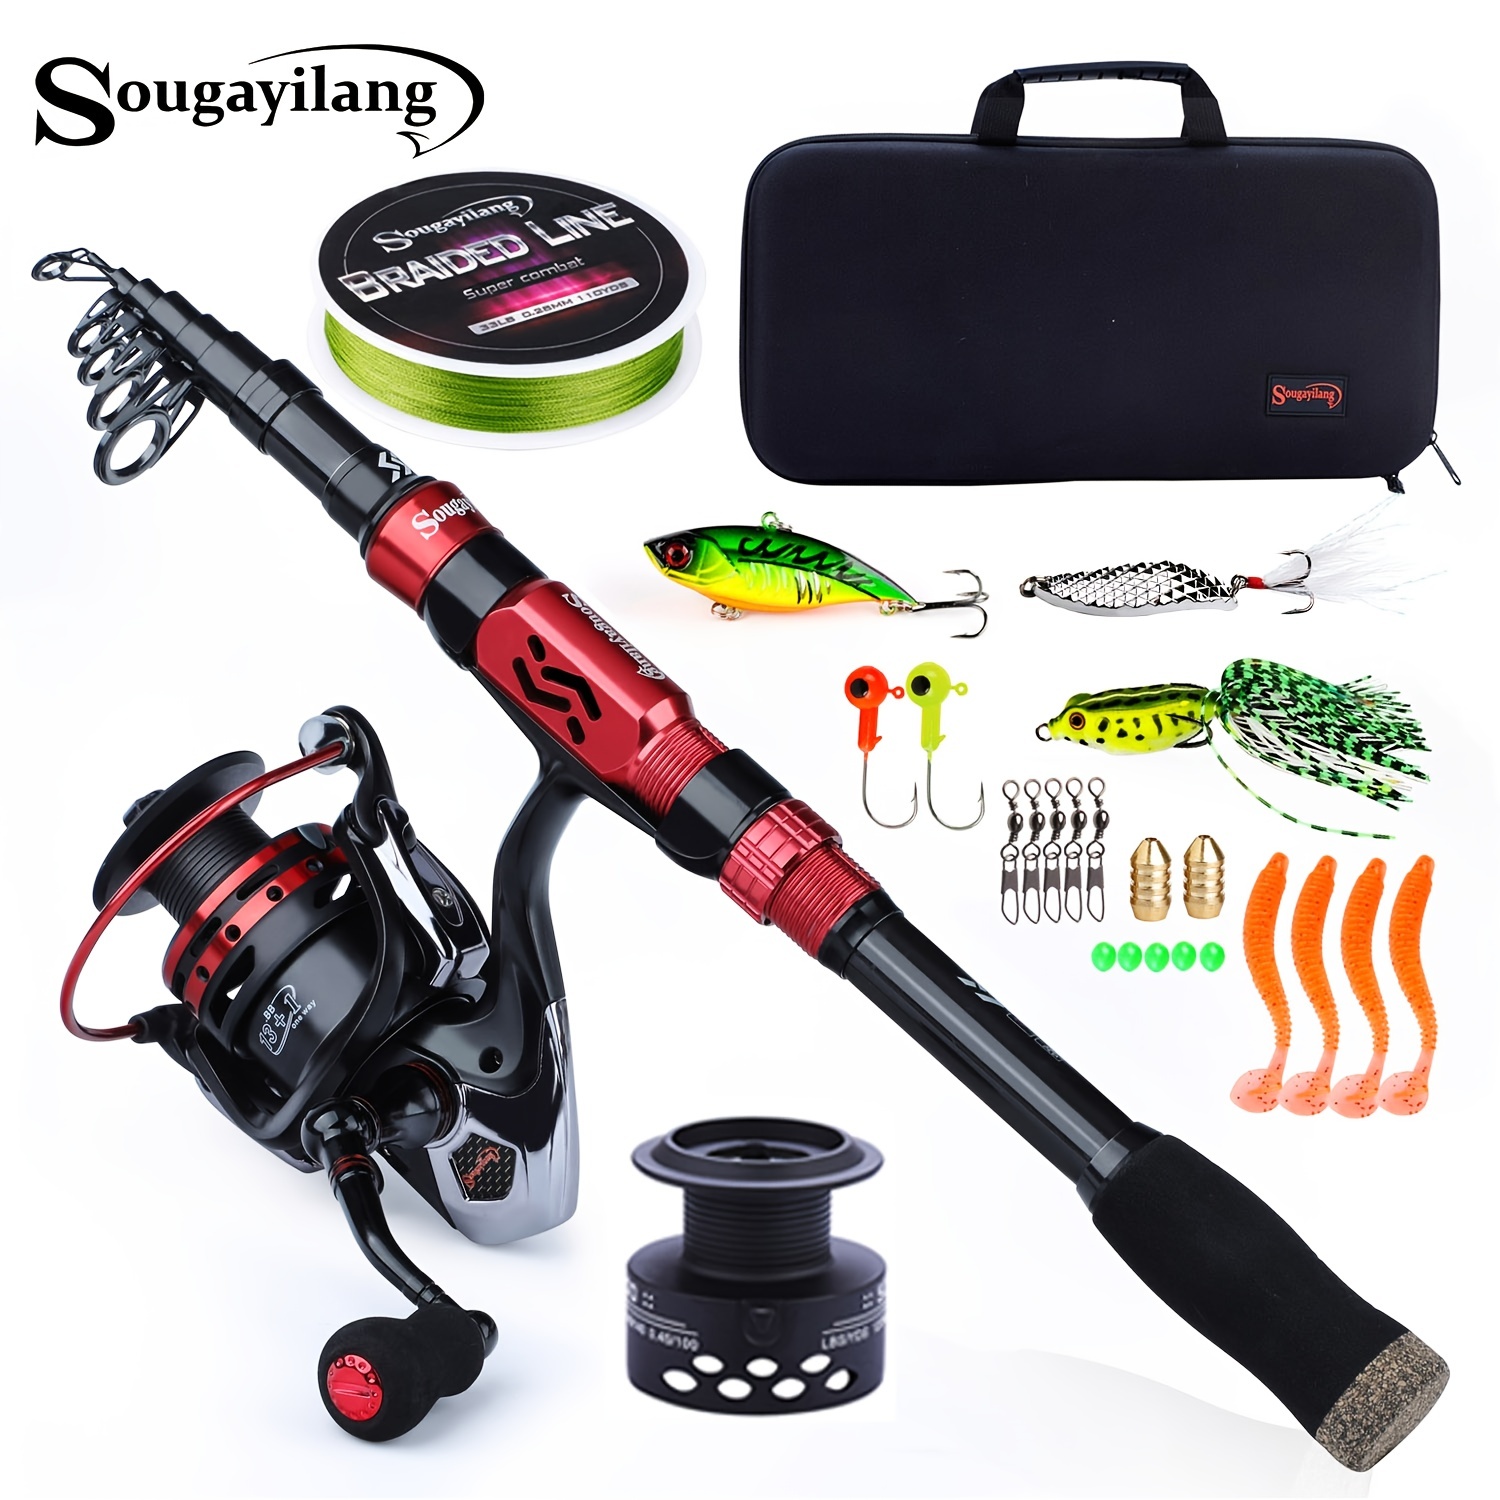 7.9ft Telescopic Fishing Rod Spinning Pole Reel Combo Full Kit with 100m Line & Bag, Size: 7.9', Silver